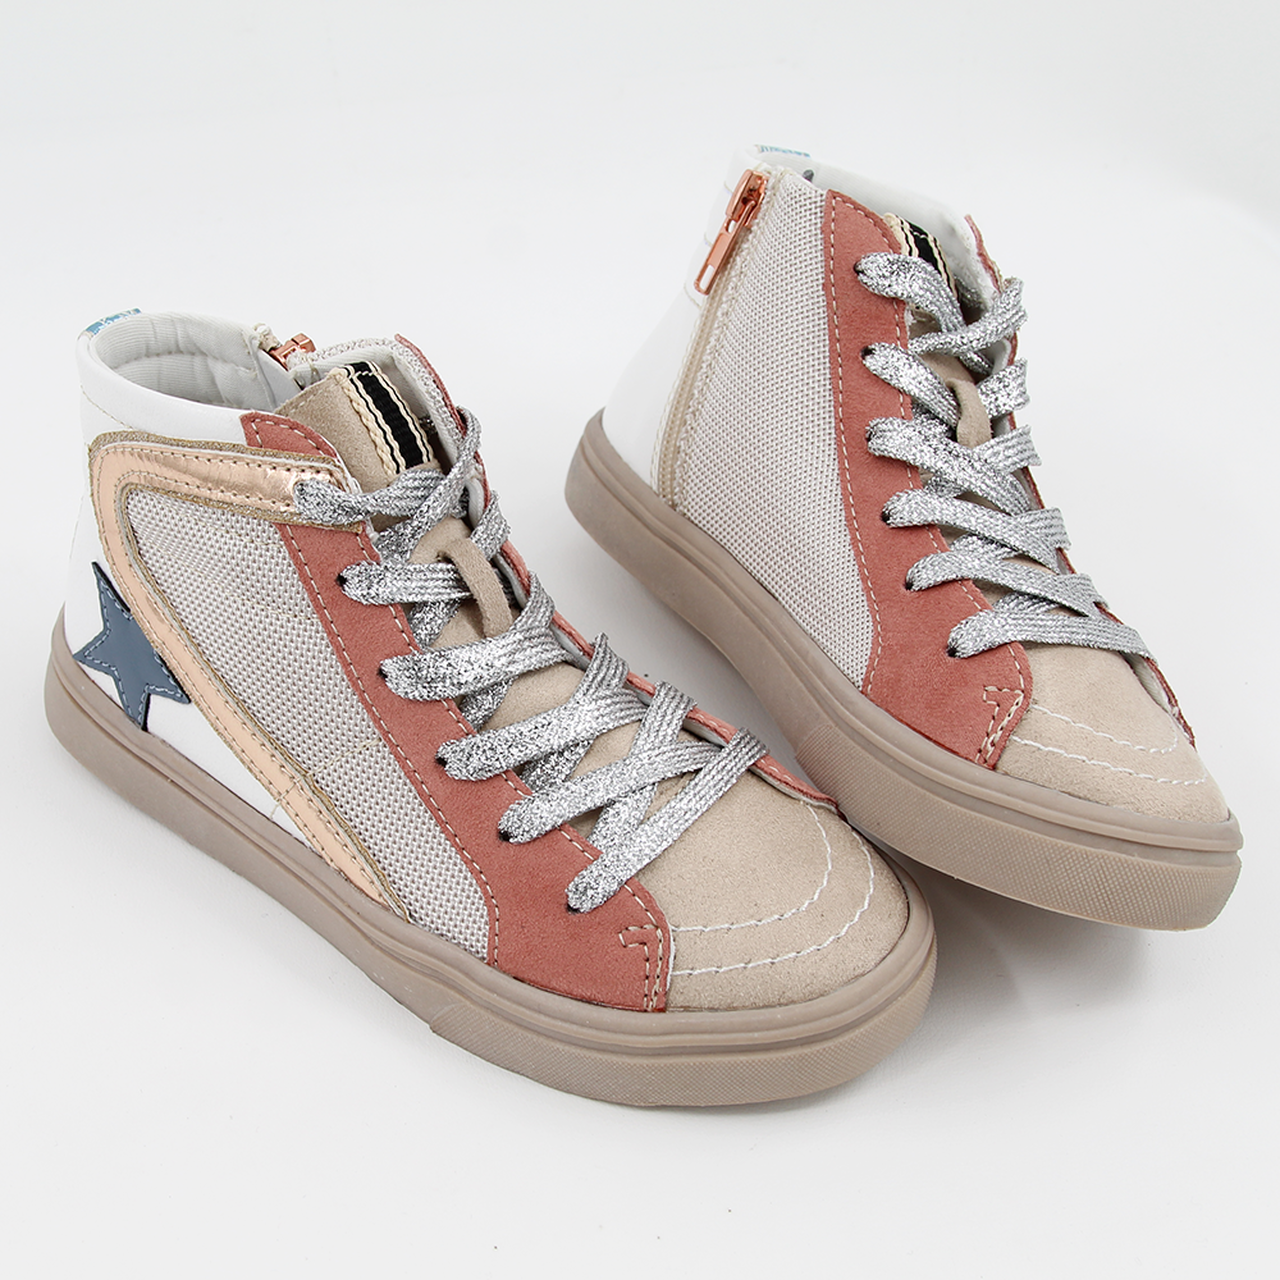 A fun sneaker that can be dressed up or down. Features silver laces, suede detailing, and side zipper.